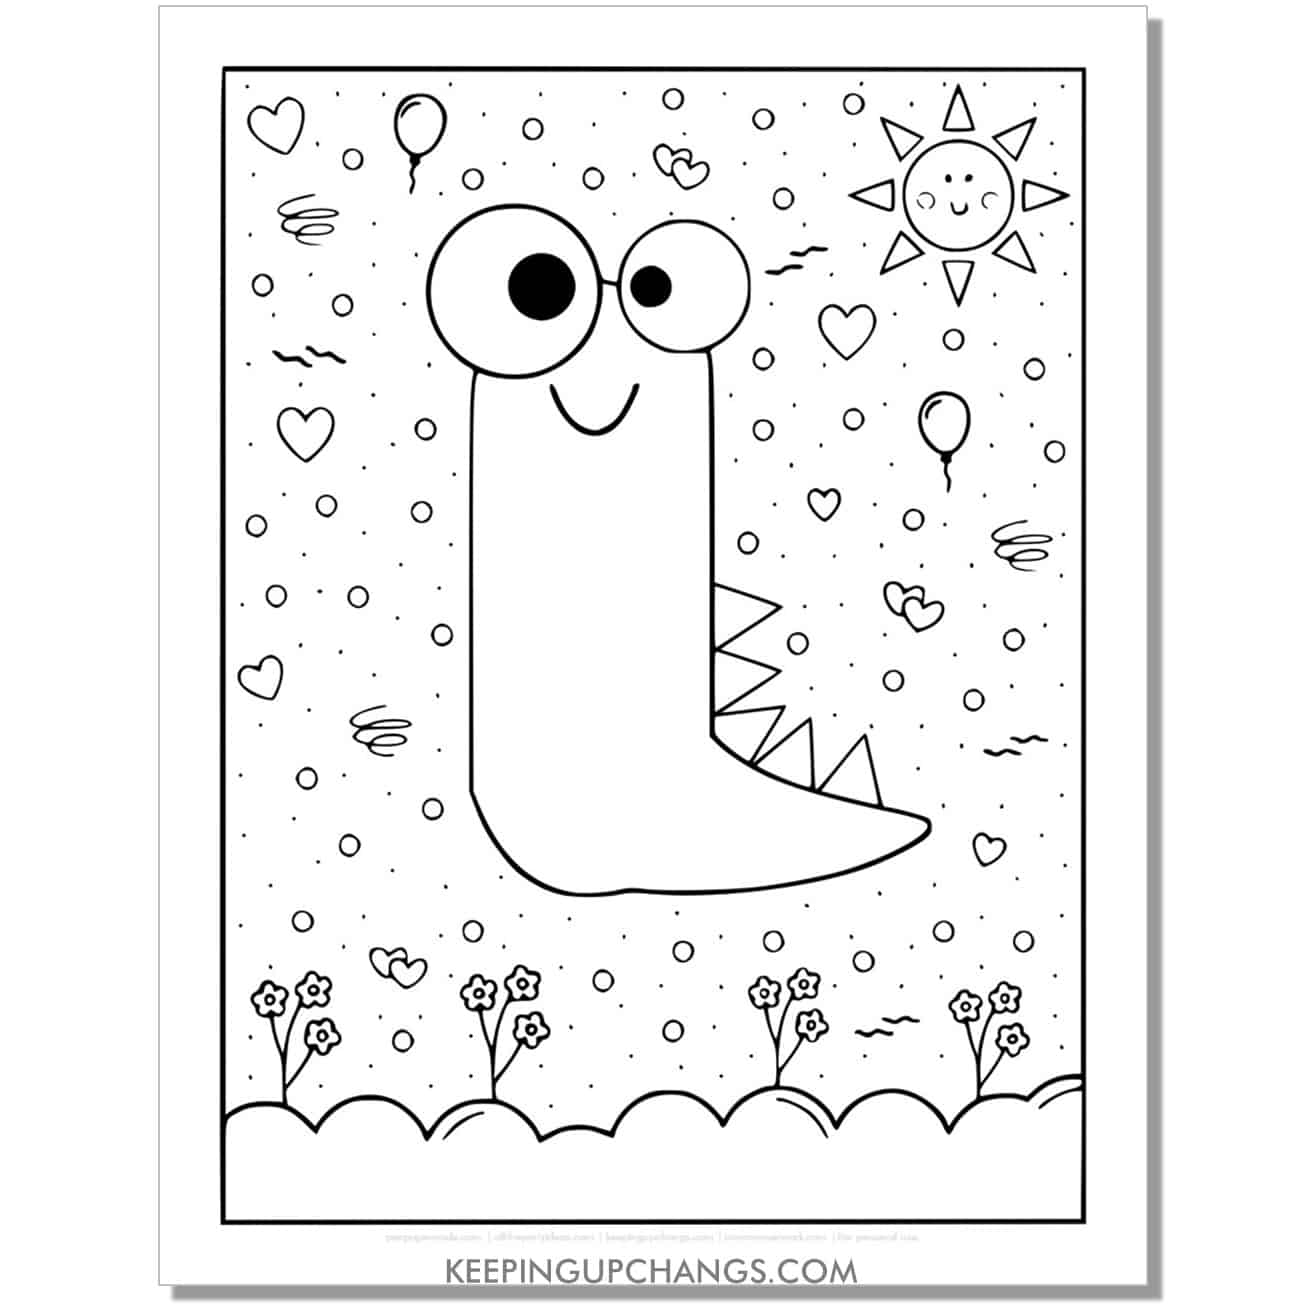 cute i coloring page with monster dinosaur letter.